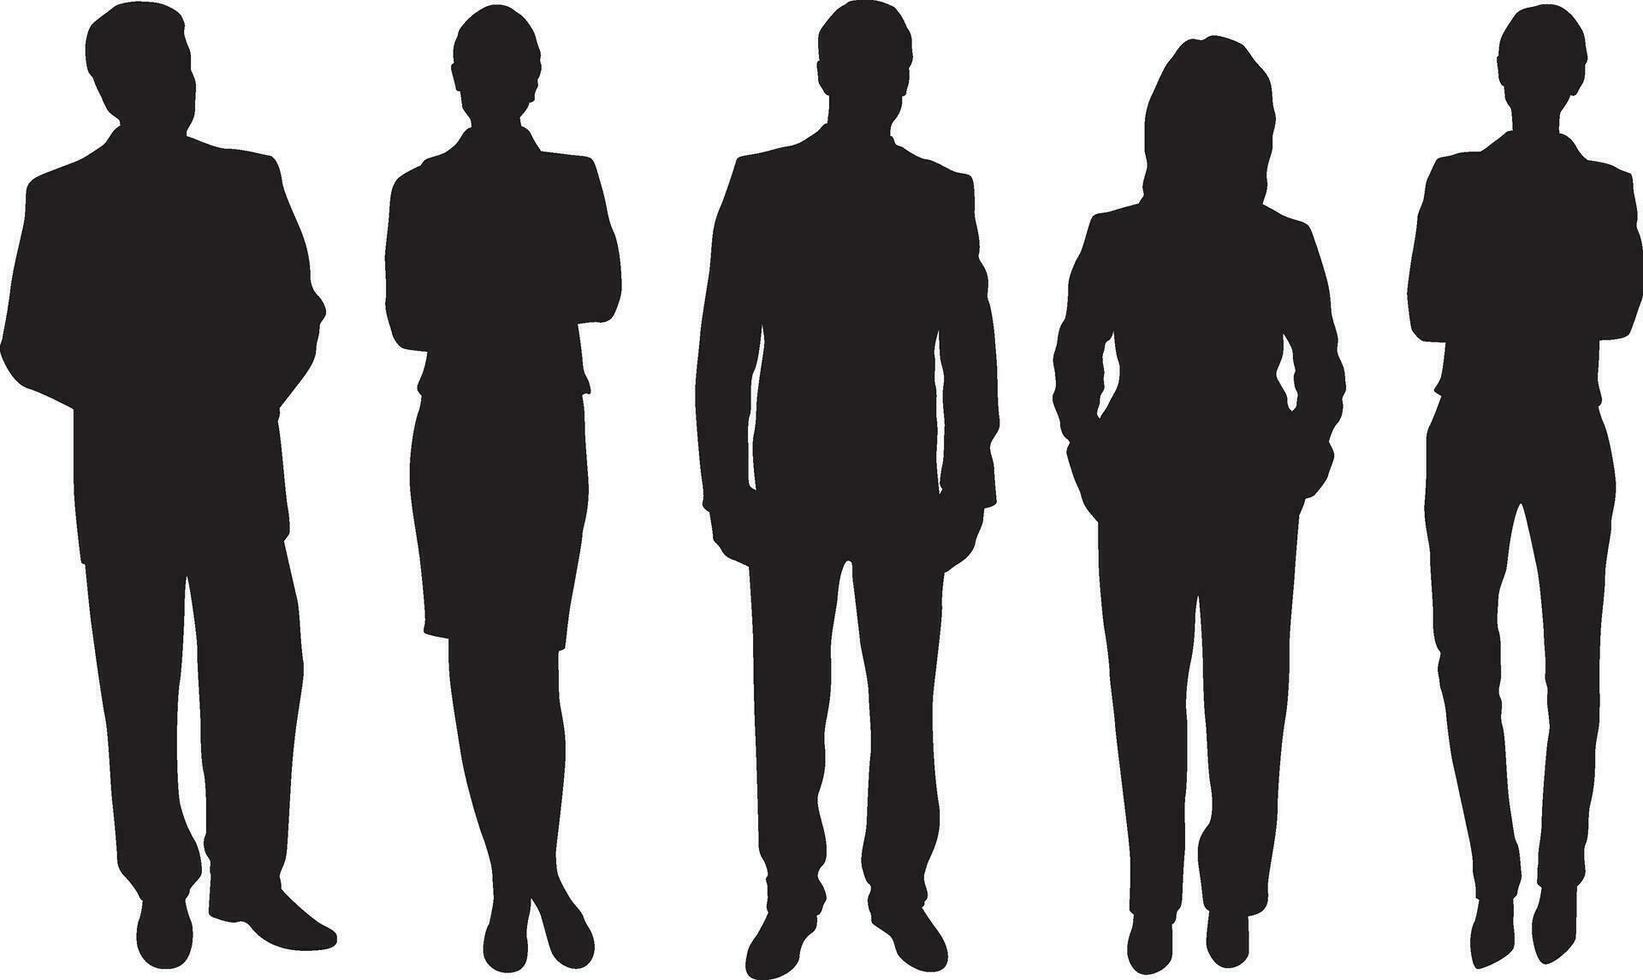 People silhouettes 52 vector